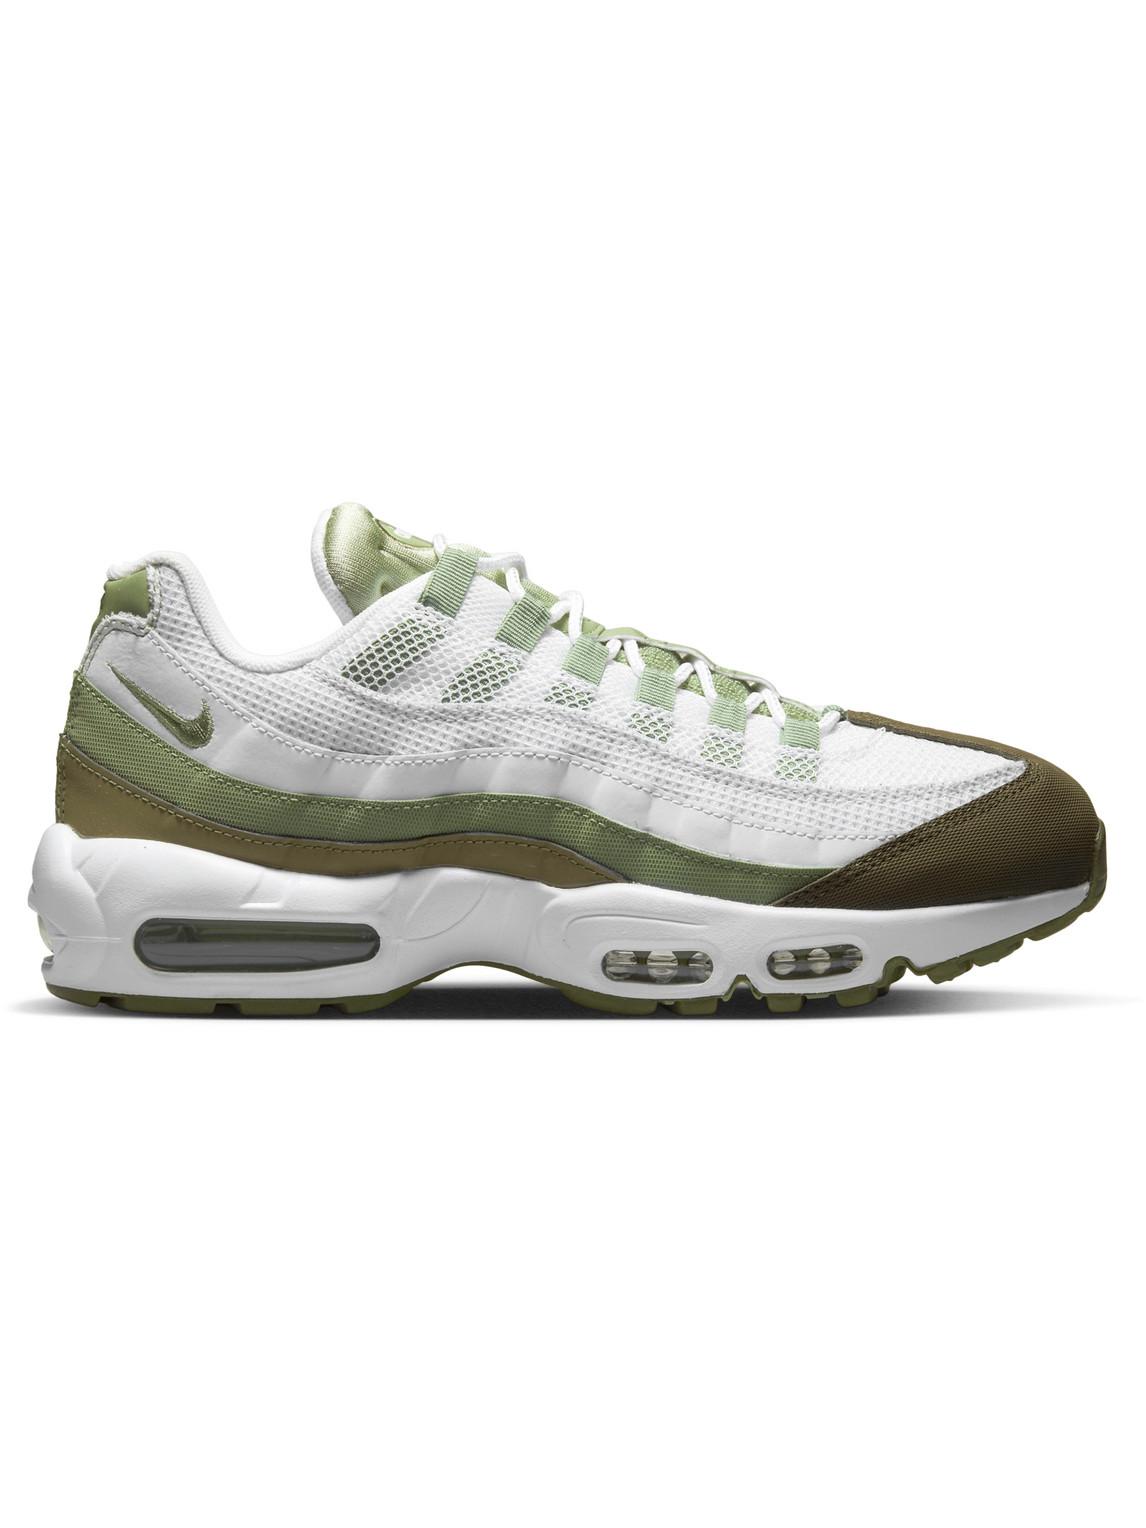 Nike Air Max 95 Shoes In White, in Green | Lyst